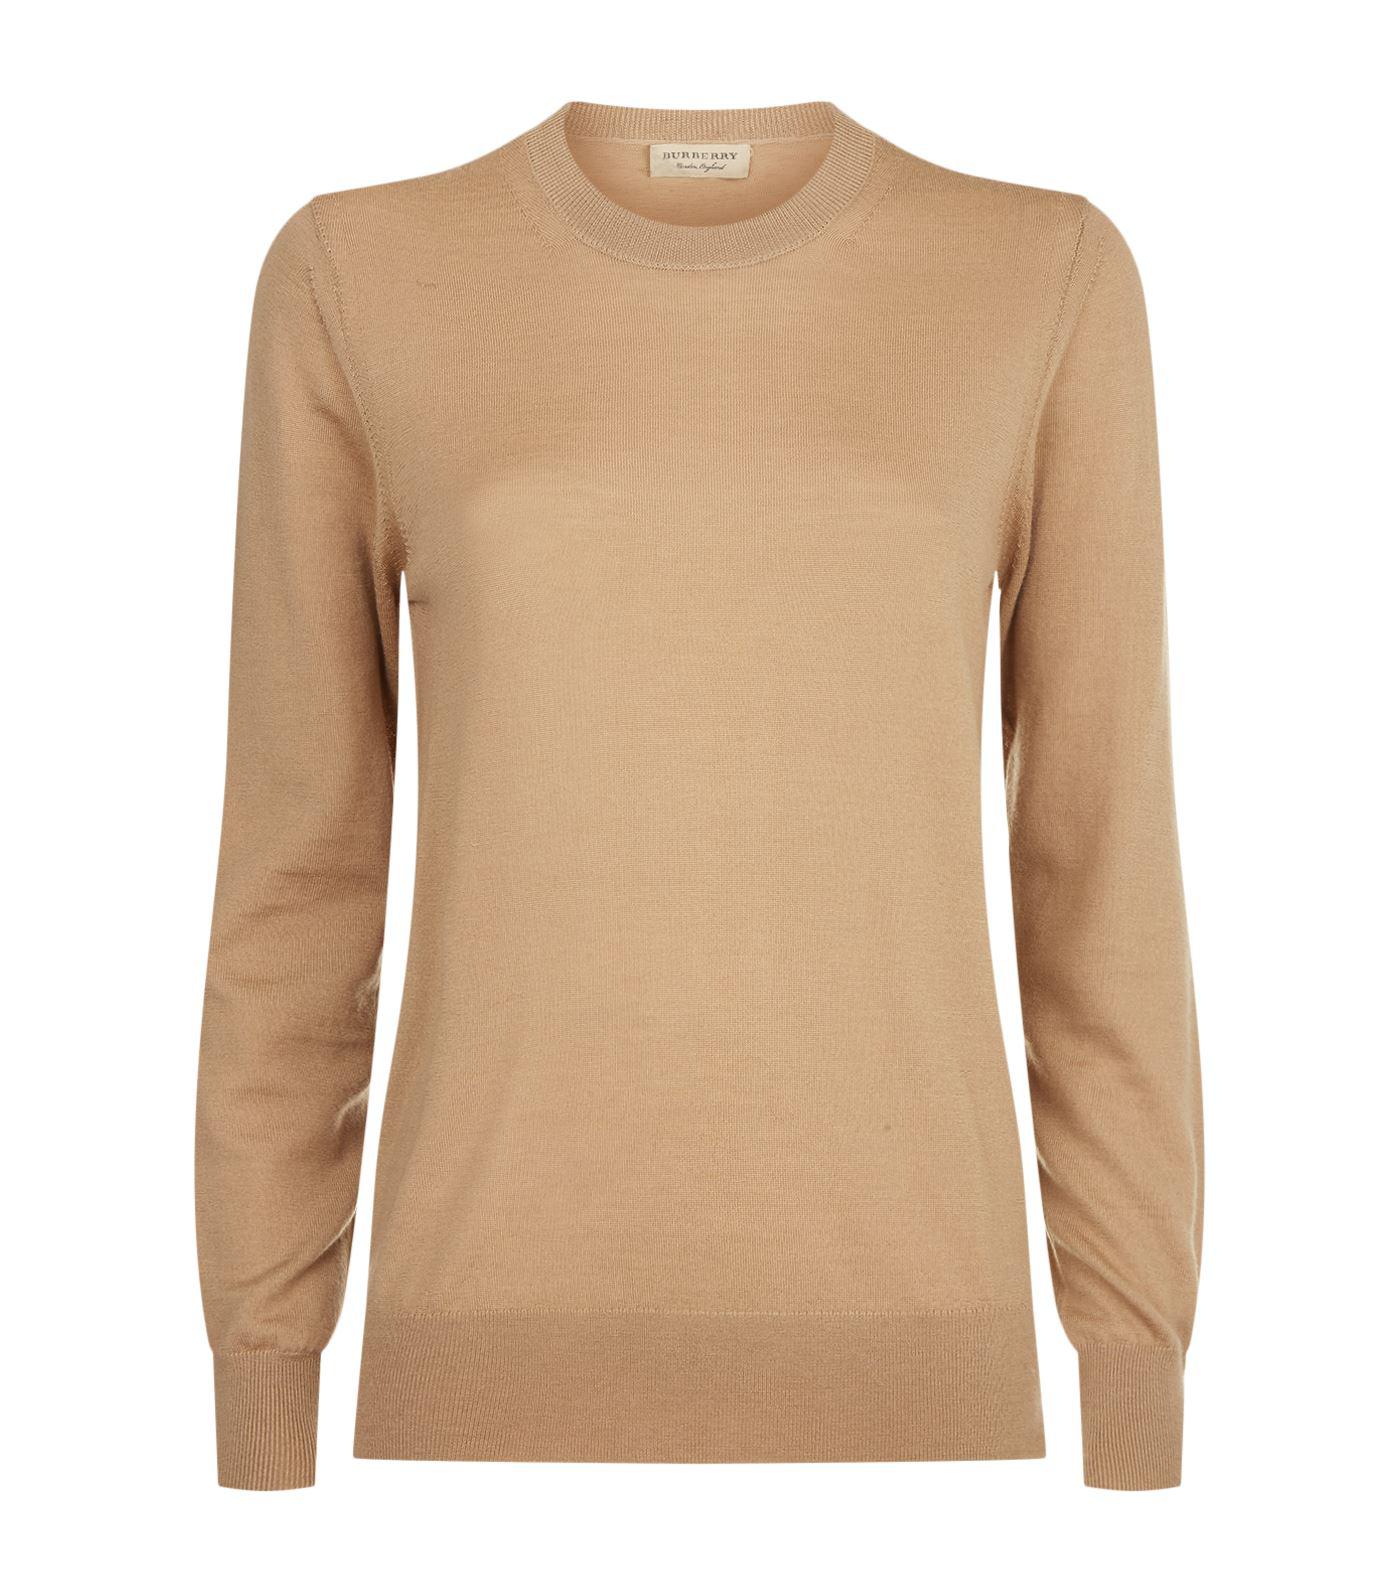 Burberry Elbow Patch Sweater in Brown | Lyst